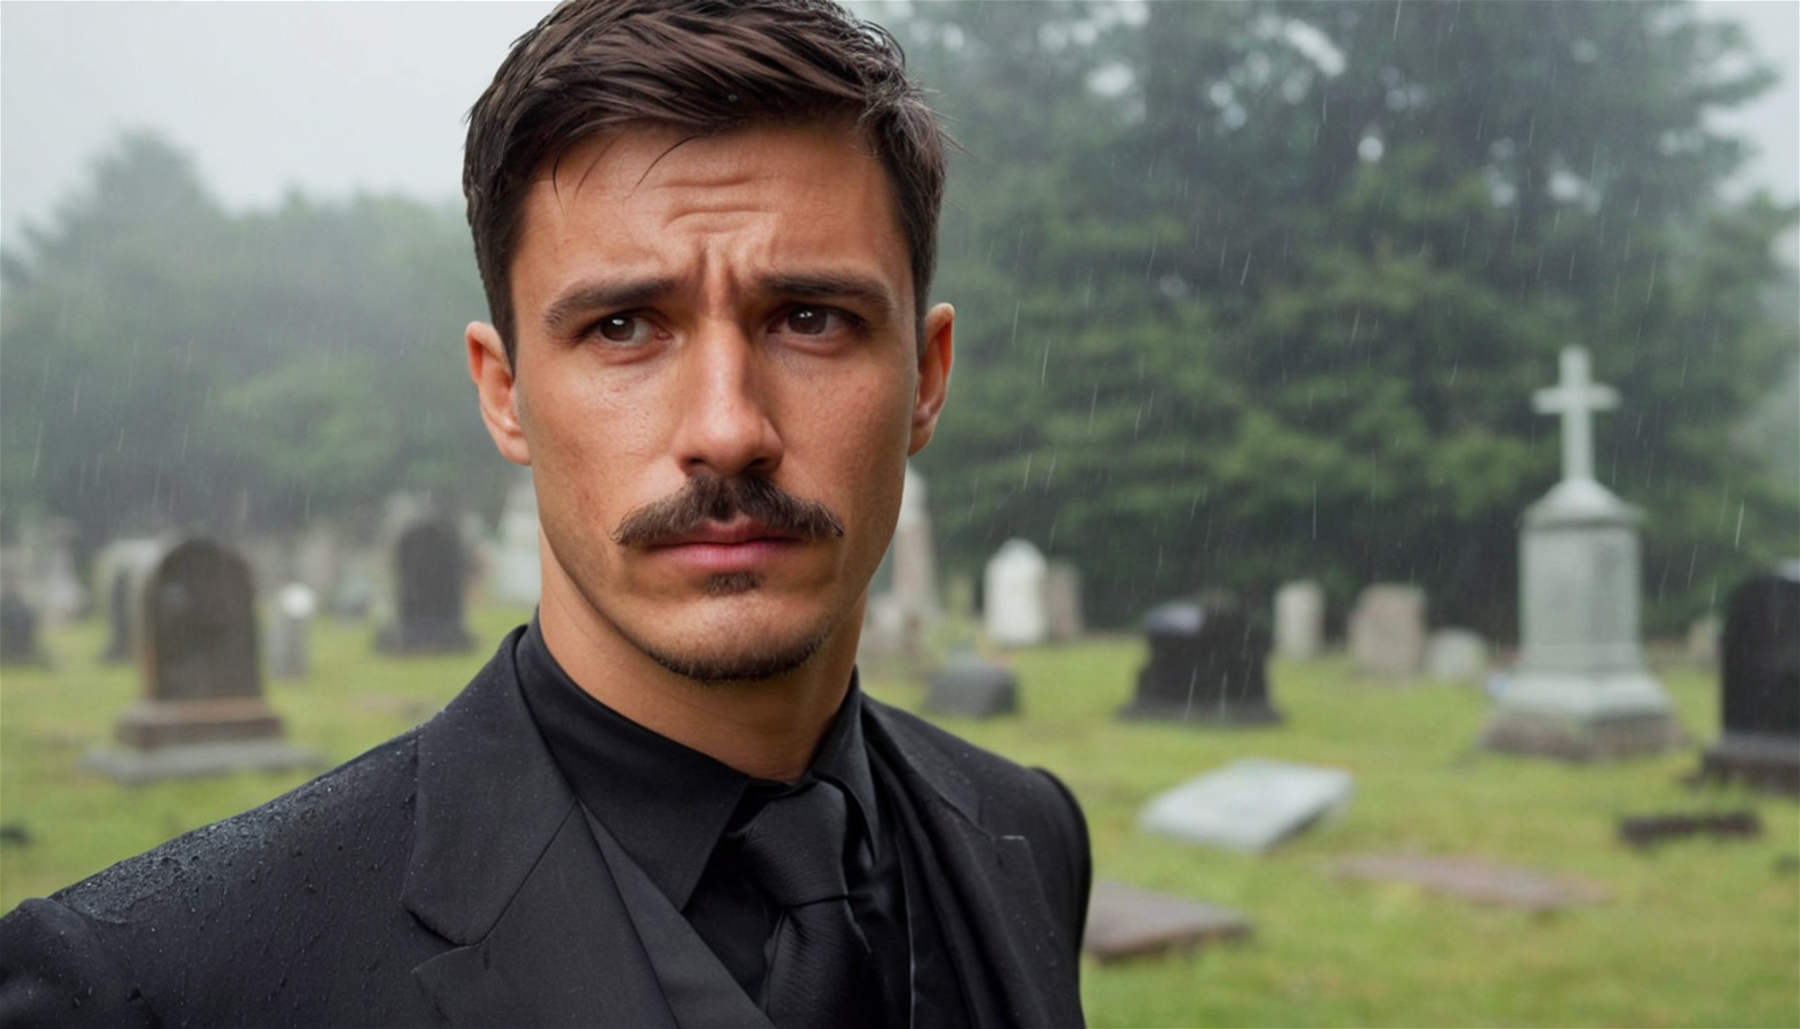 A (sad) man wearing a black suit, crying face, rainy day at the cemetery, short hair and mustache, graveyard